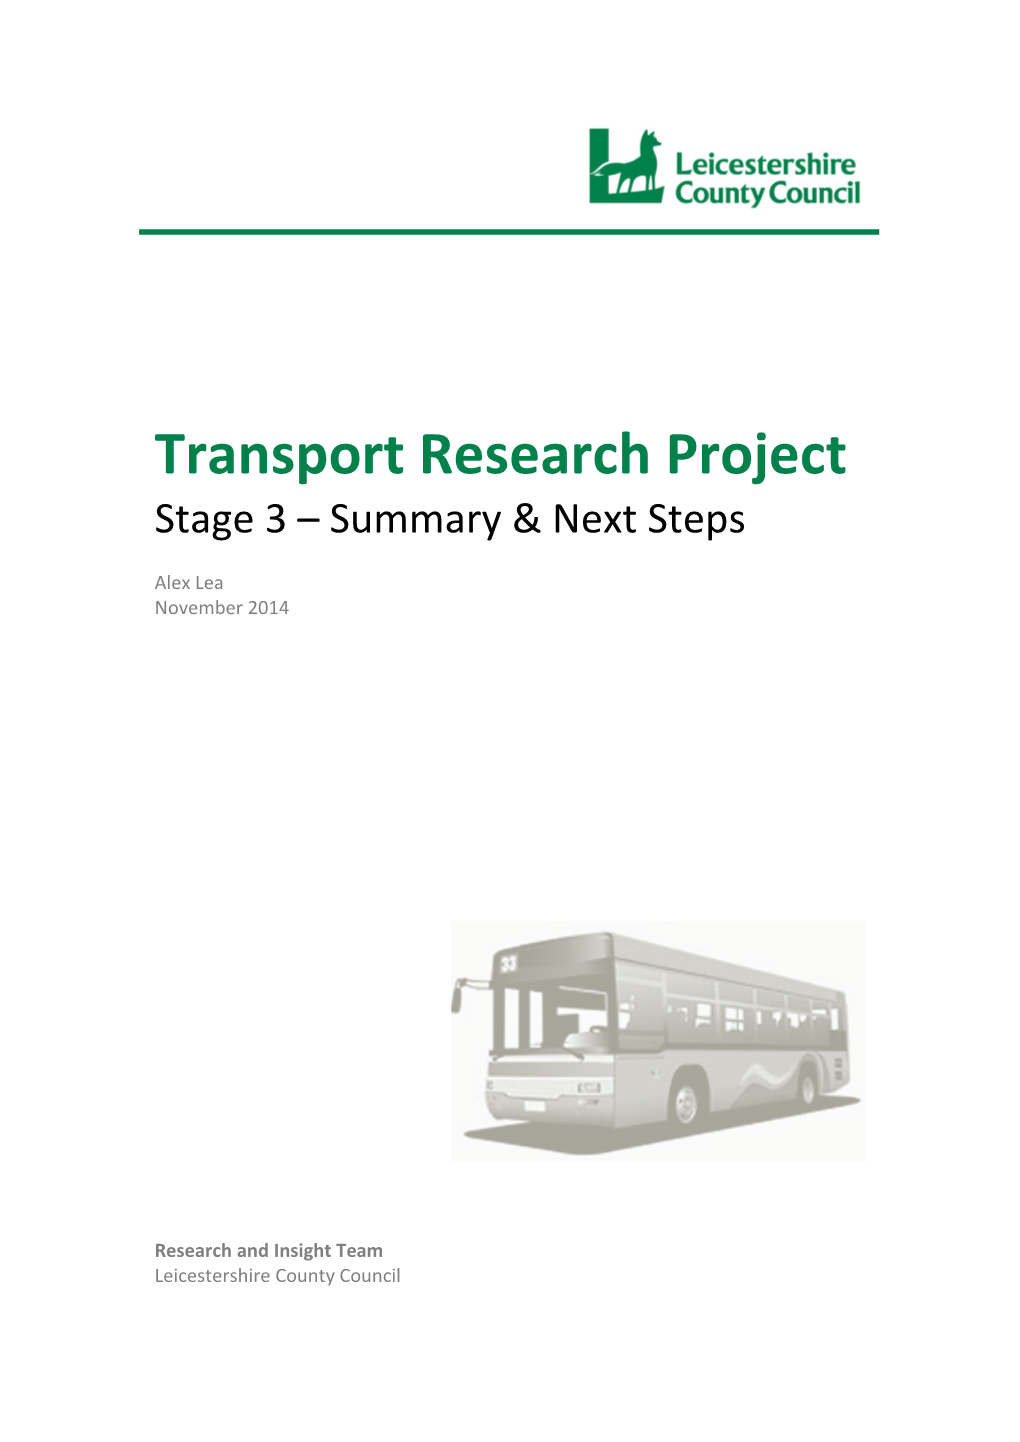 Transport Research Project Stage 3 – Summary & Next Steps